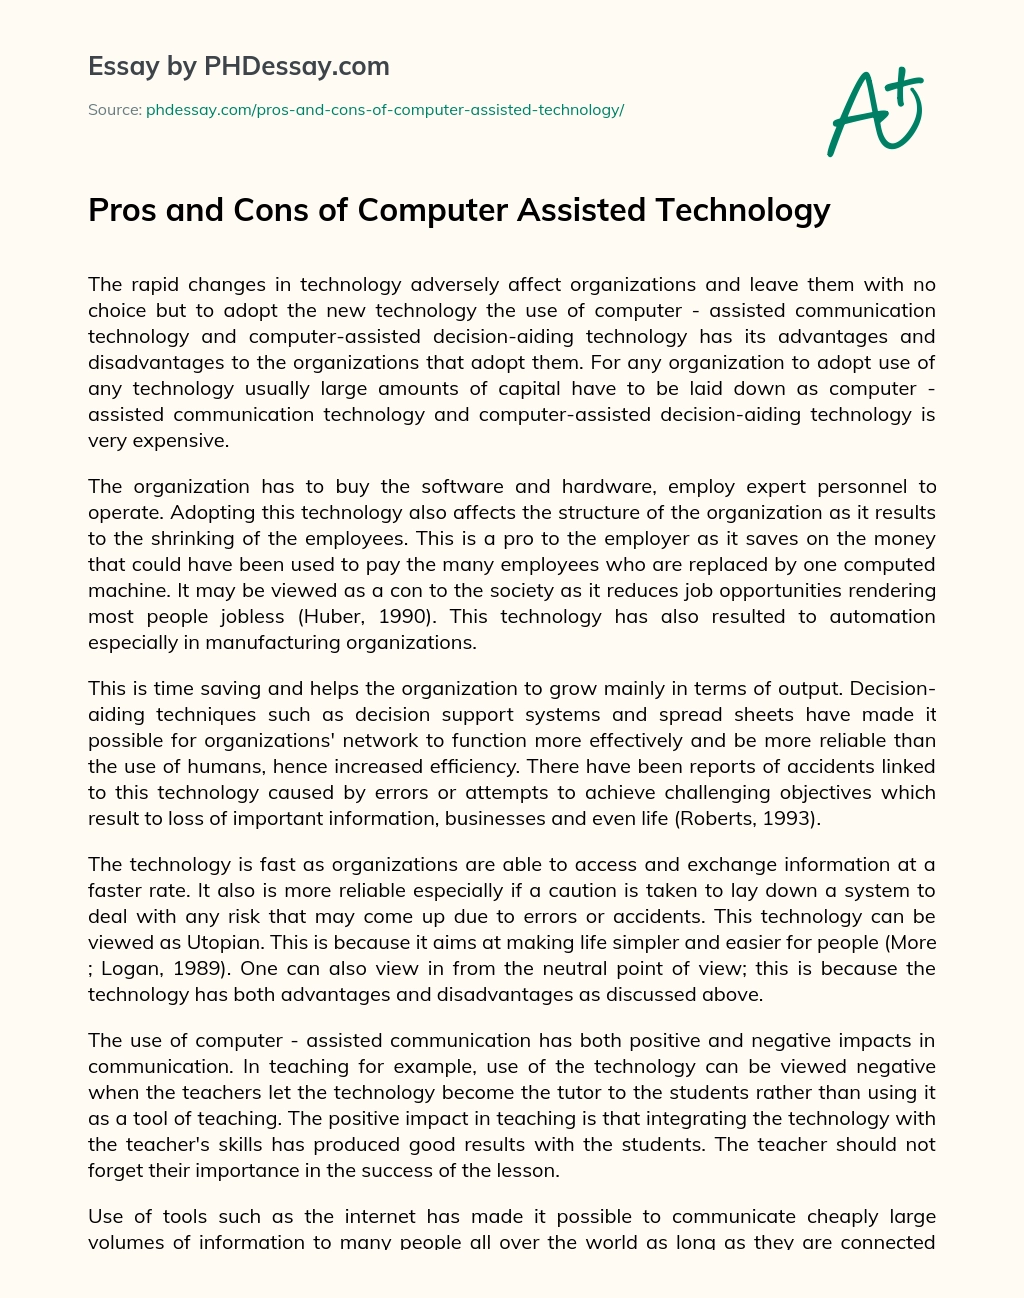 Pros and Cons of Computer Assisted Technology essay